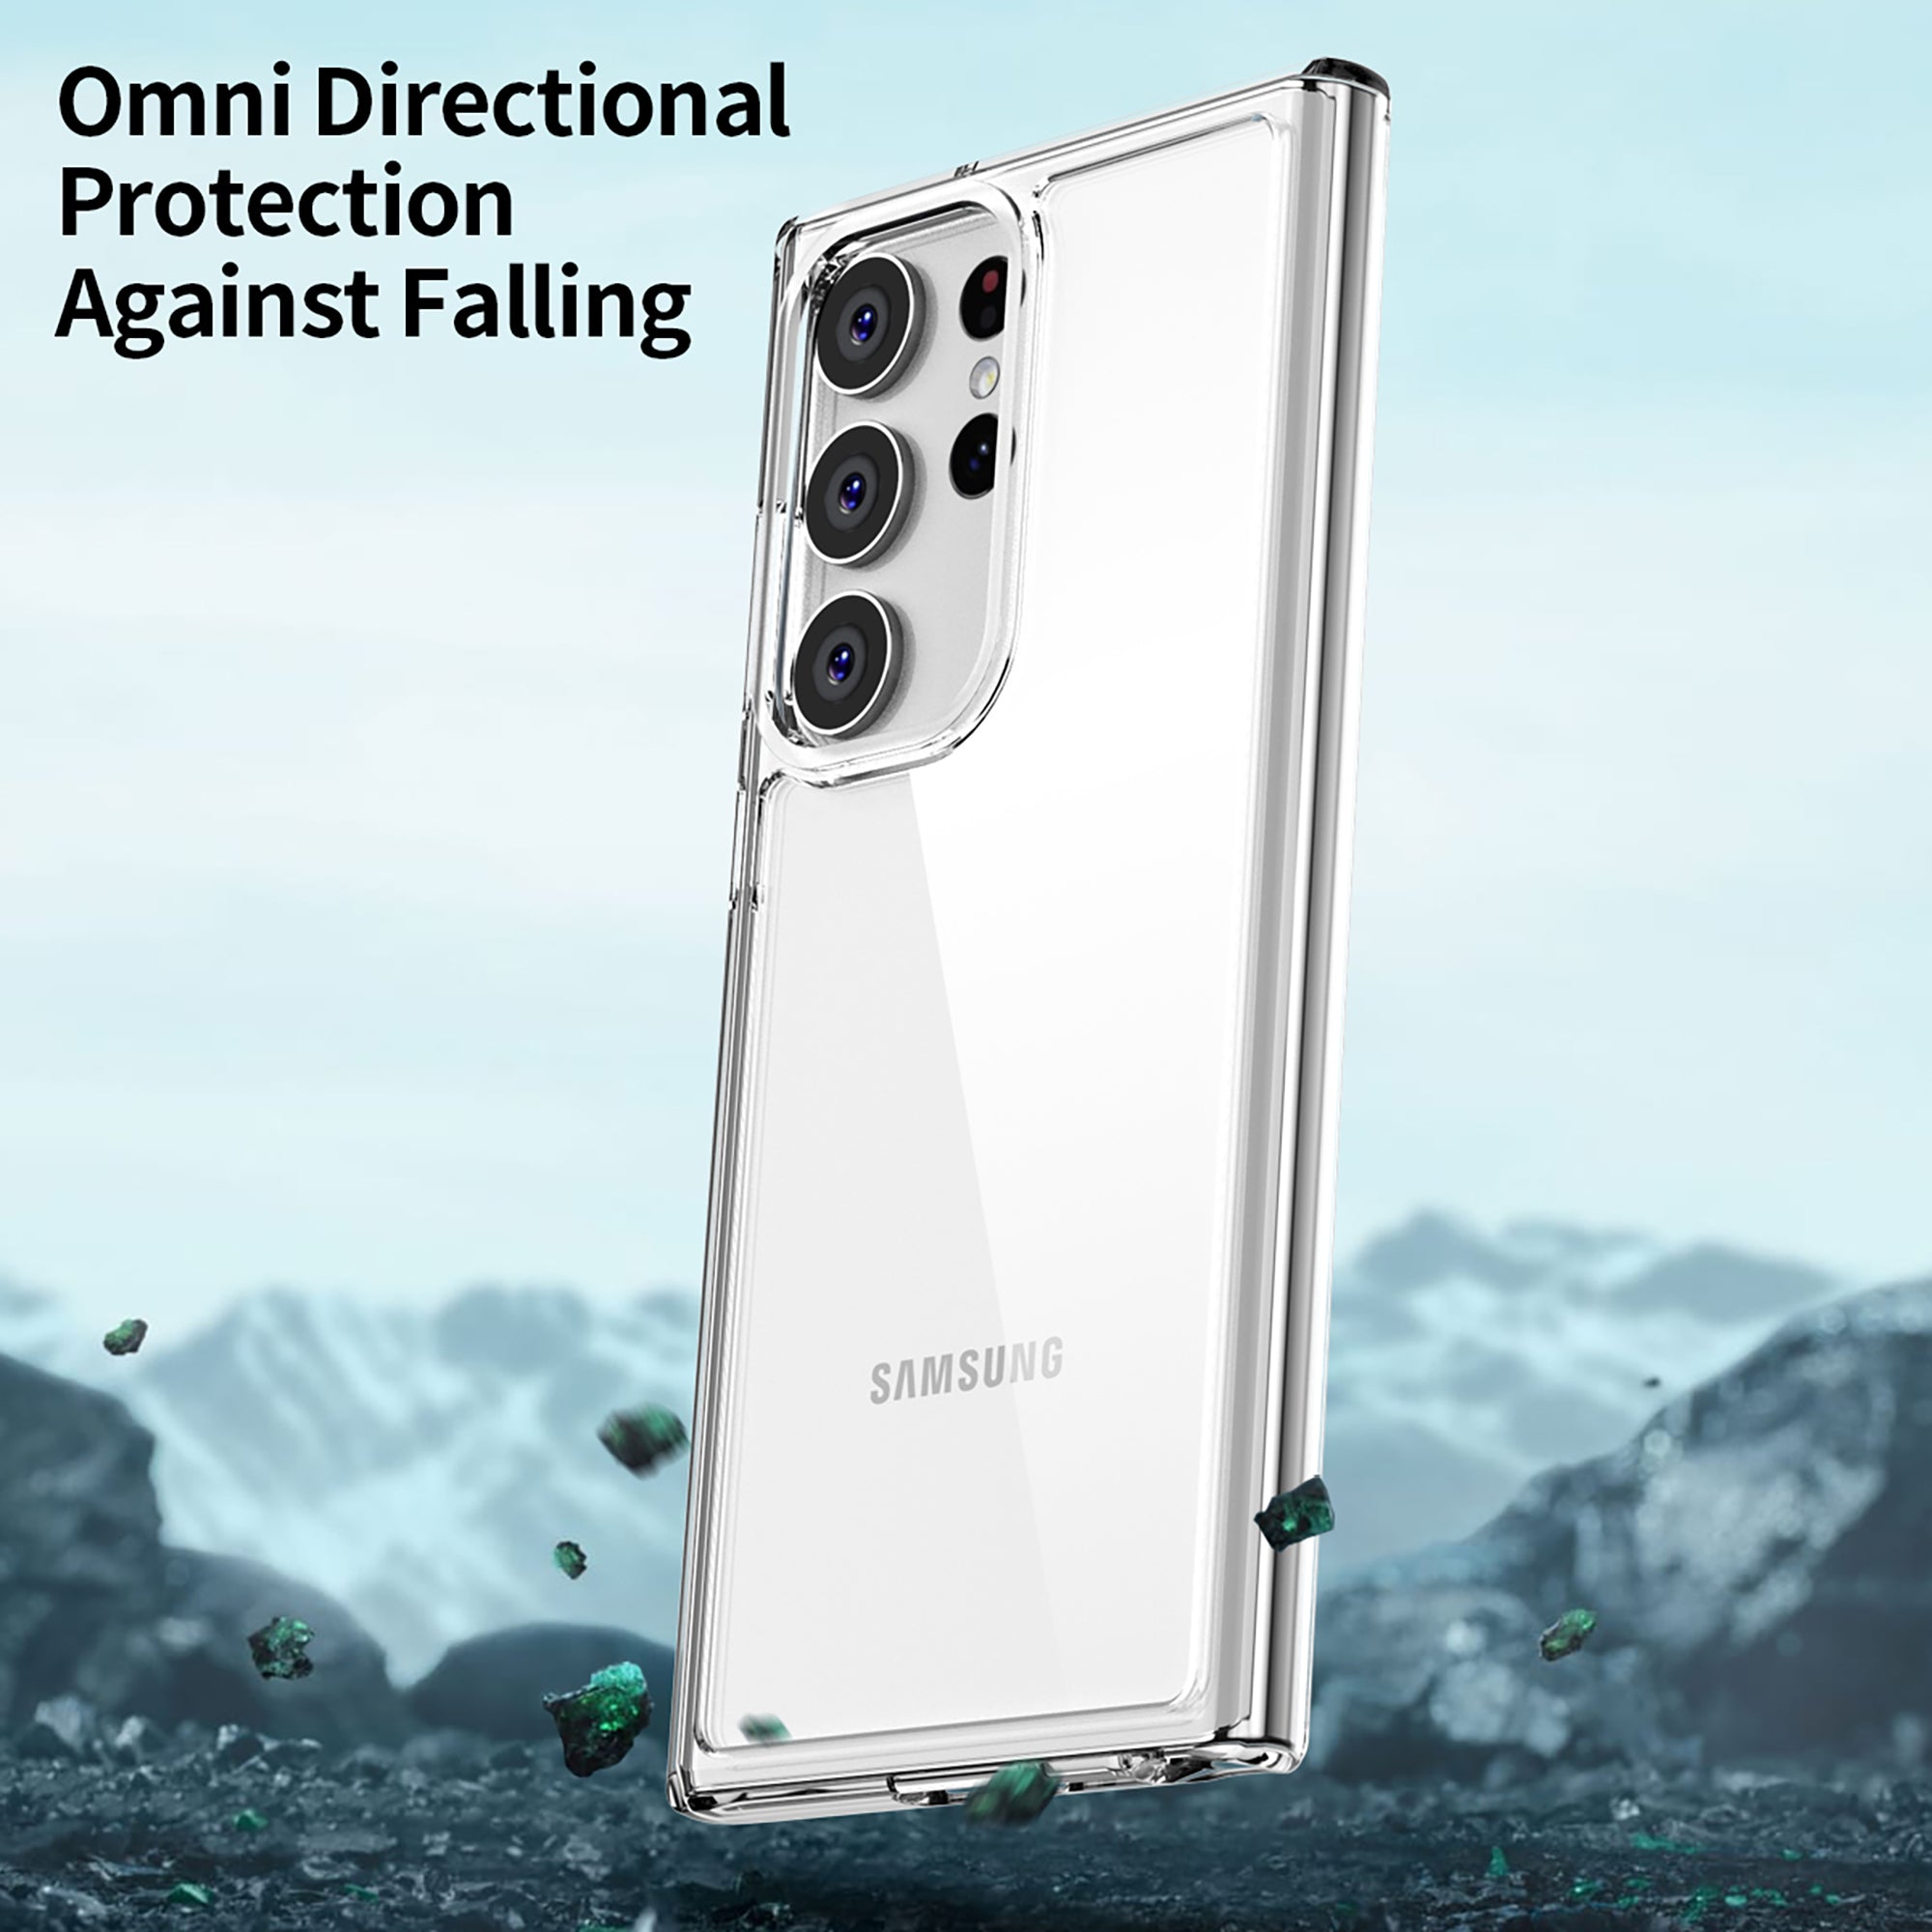 Omni Directional Protection Against Falling